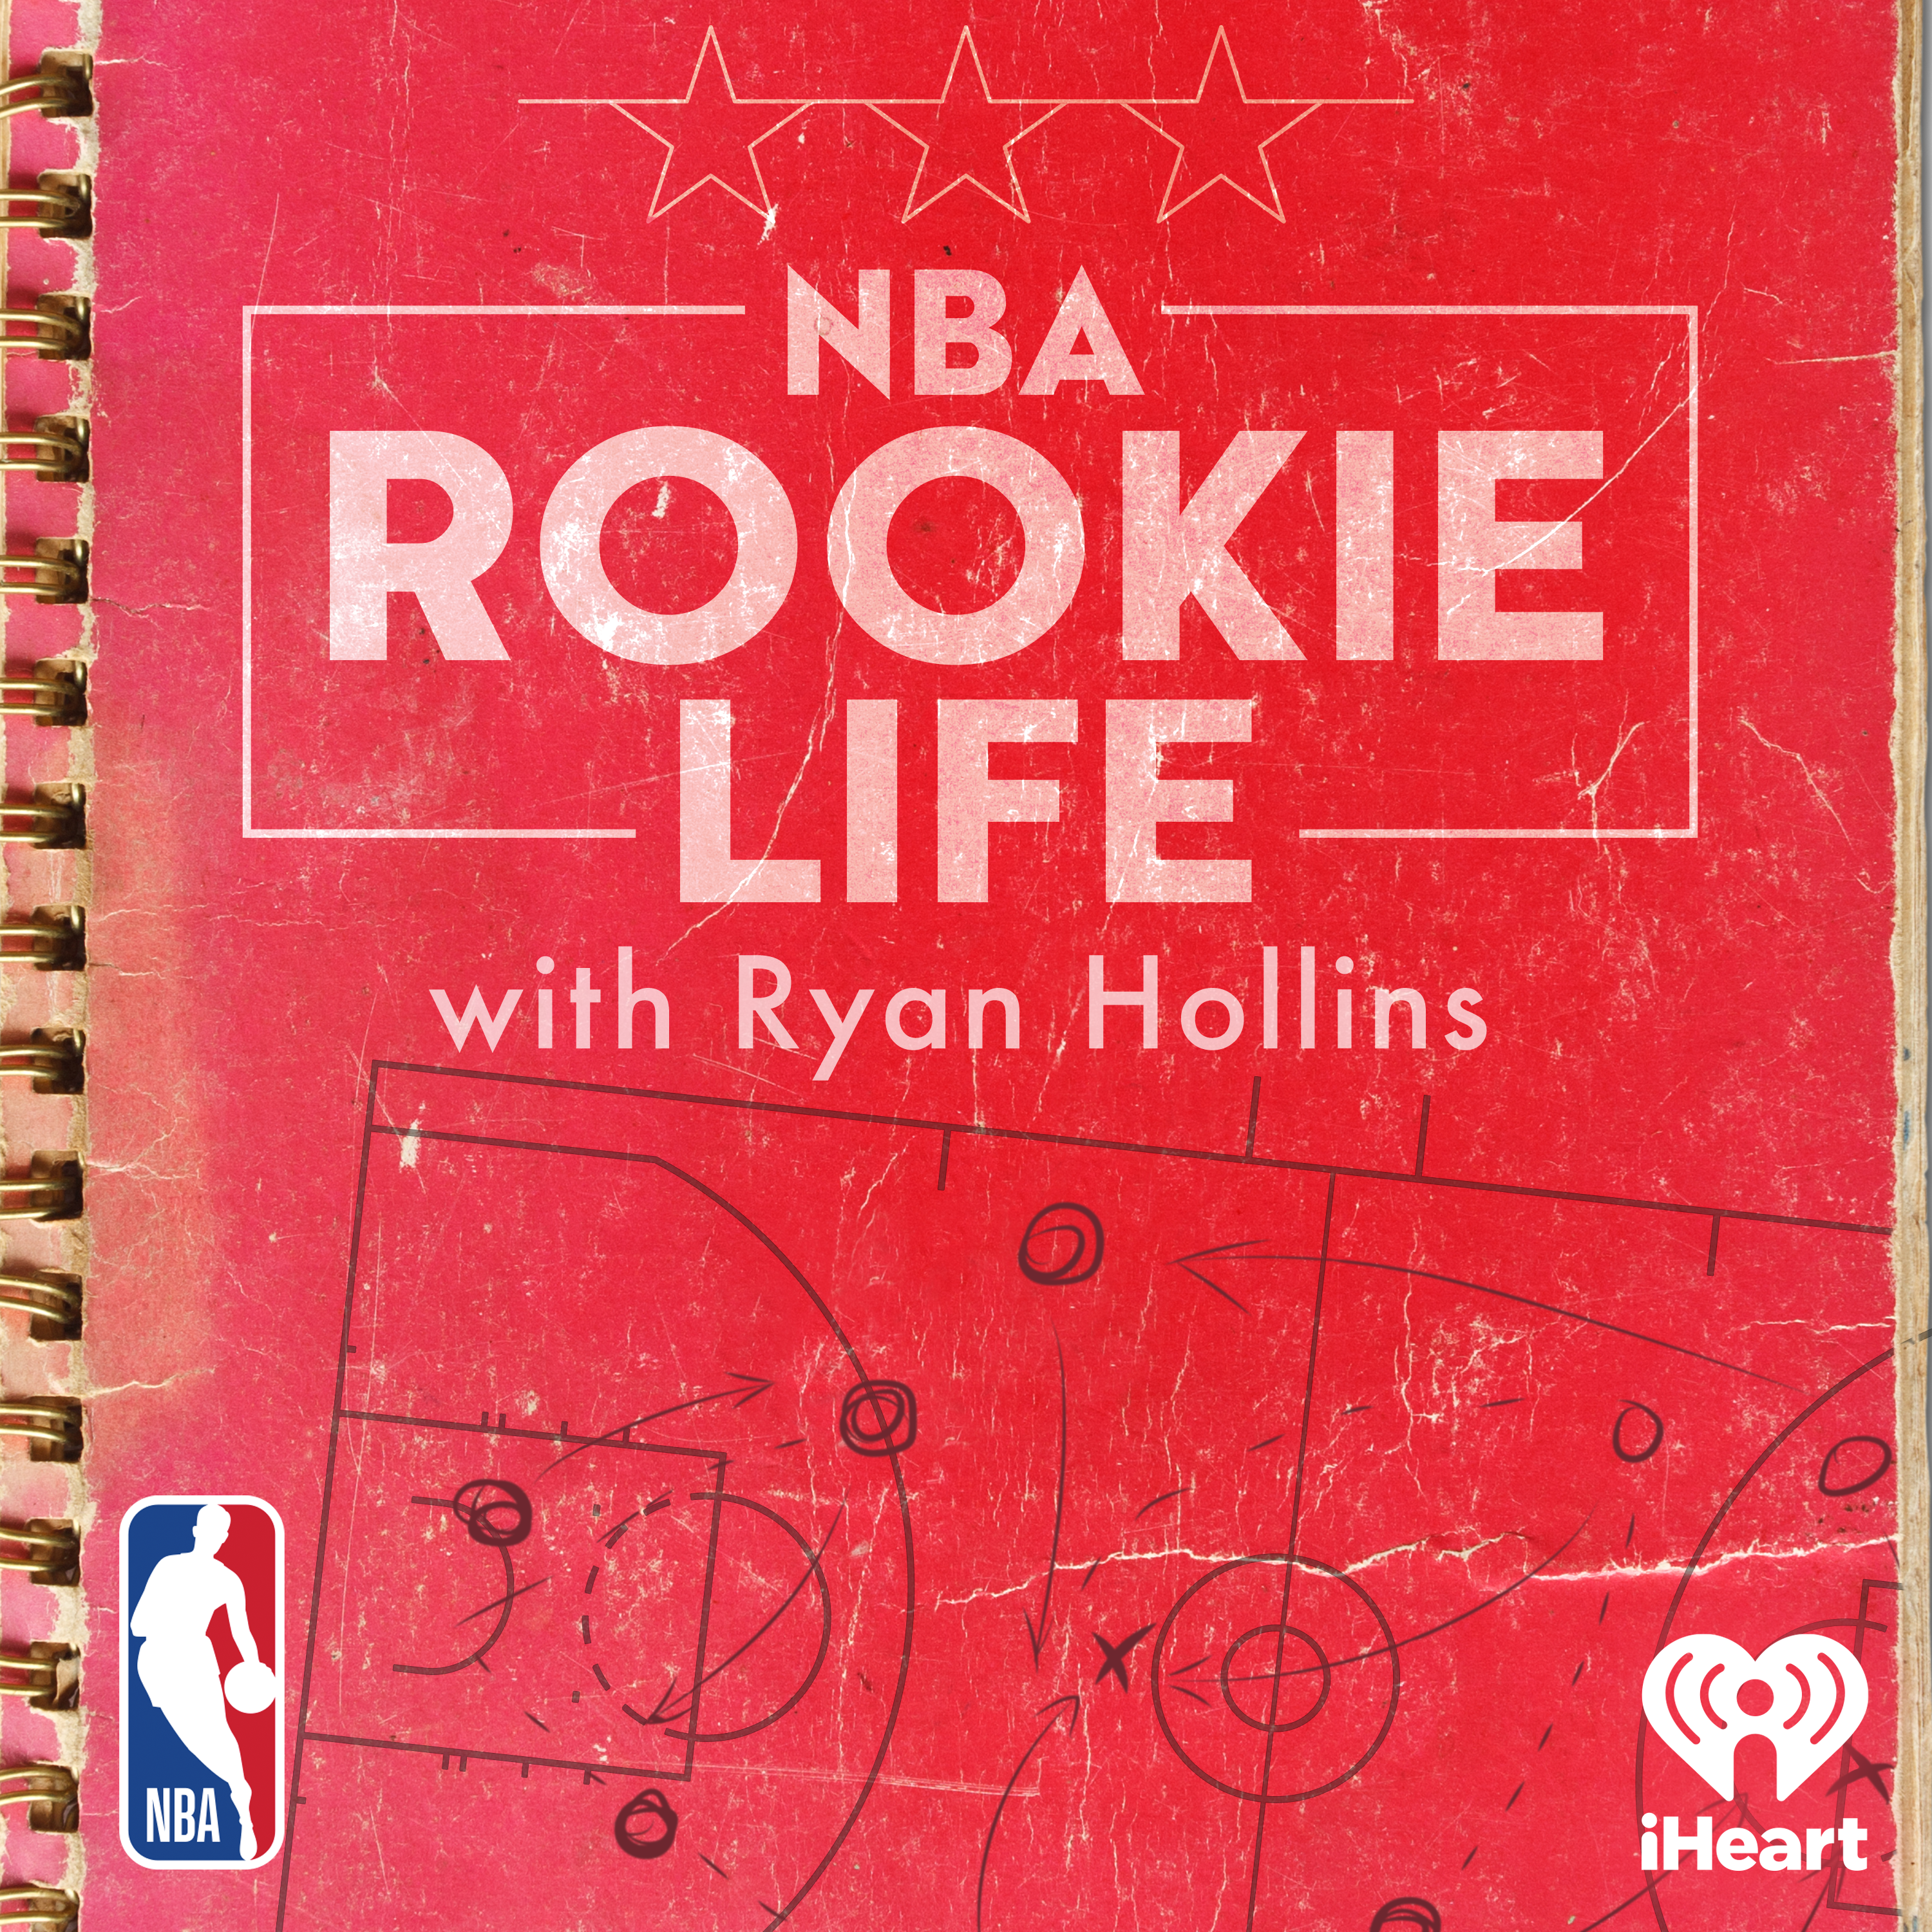 Introducing: NBA Rookie with Ryan Hollins